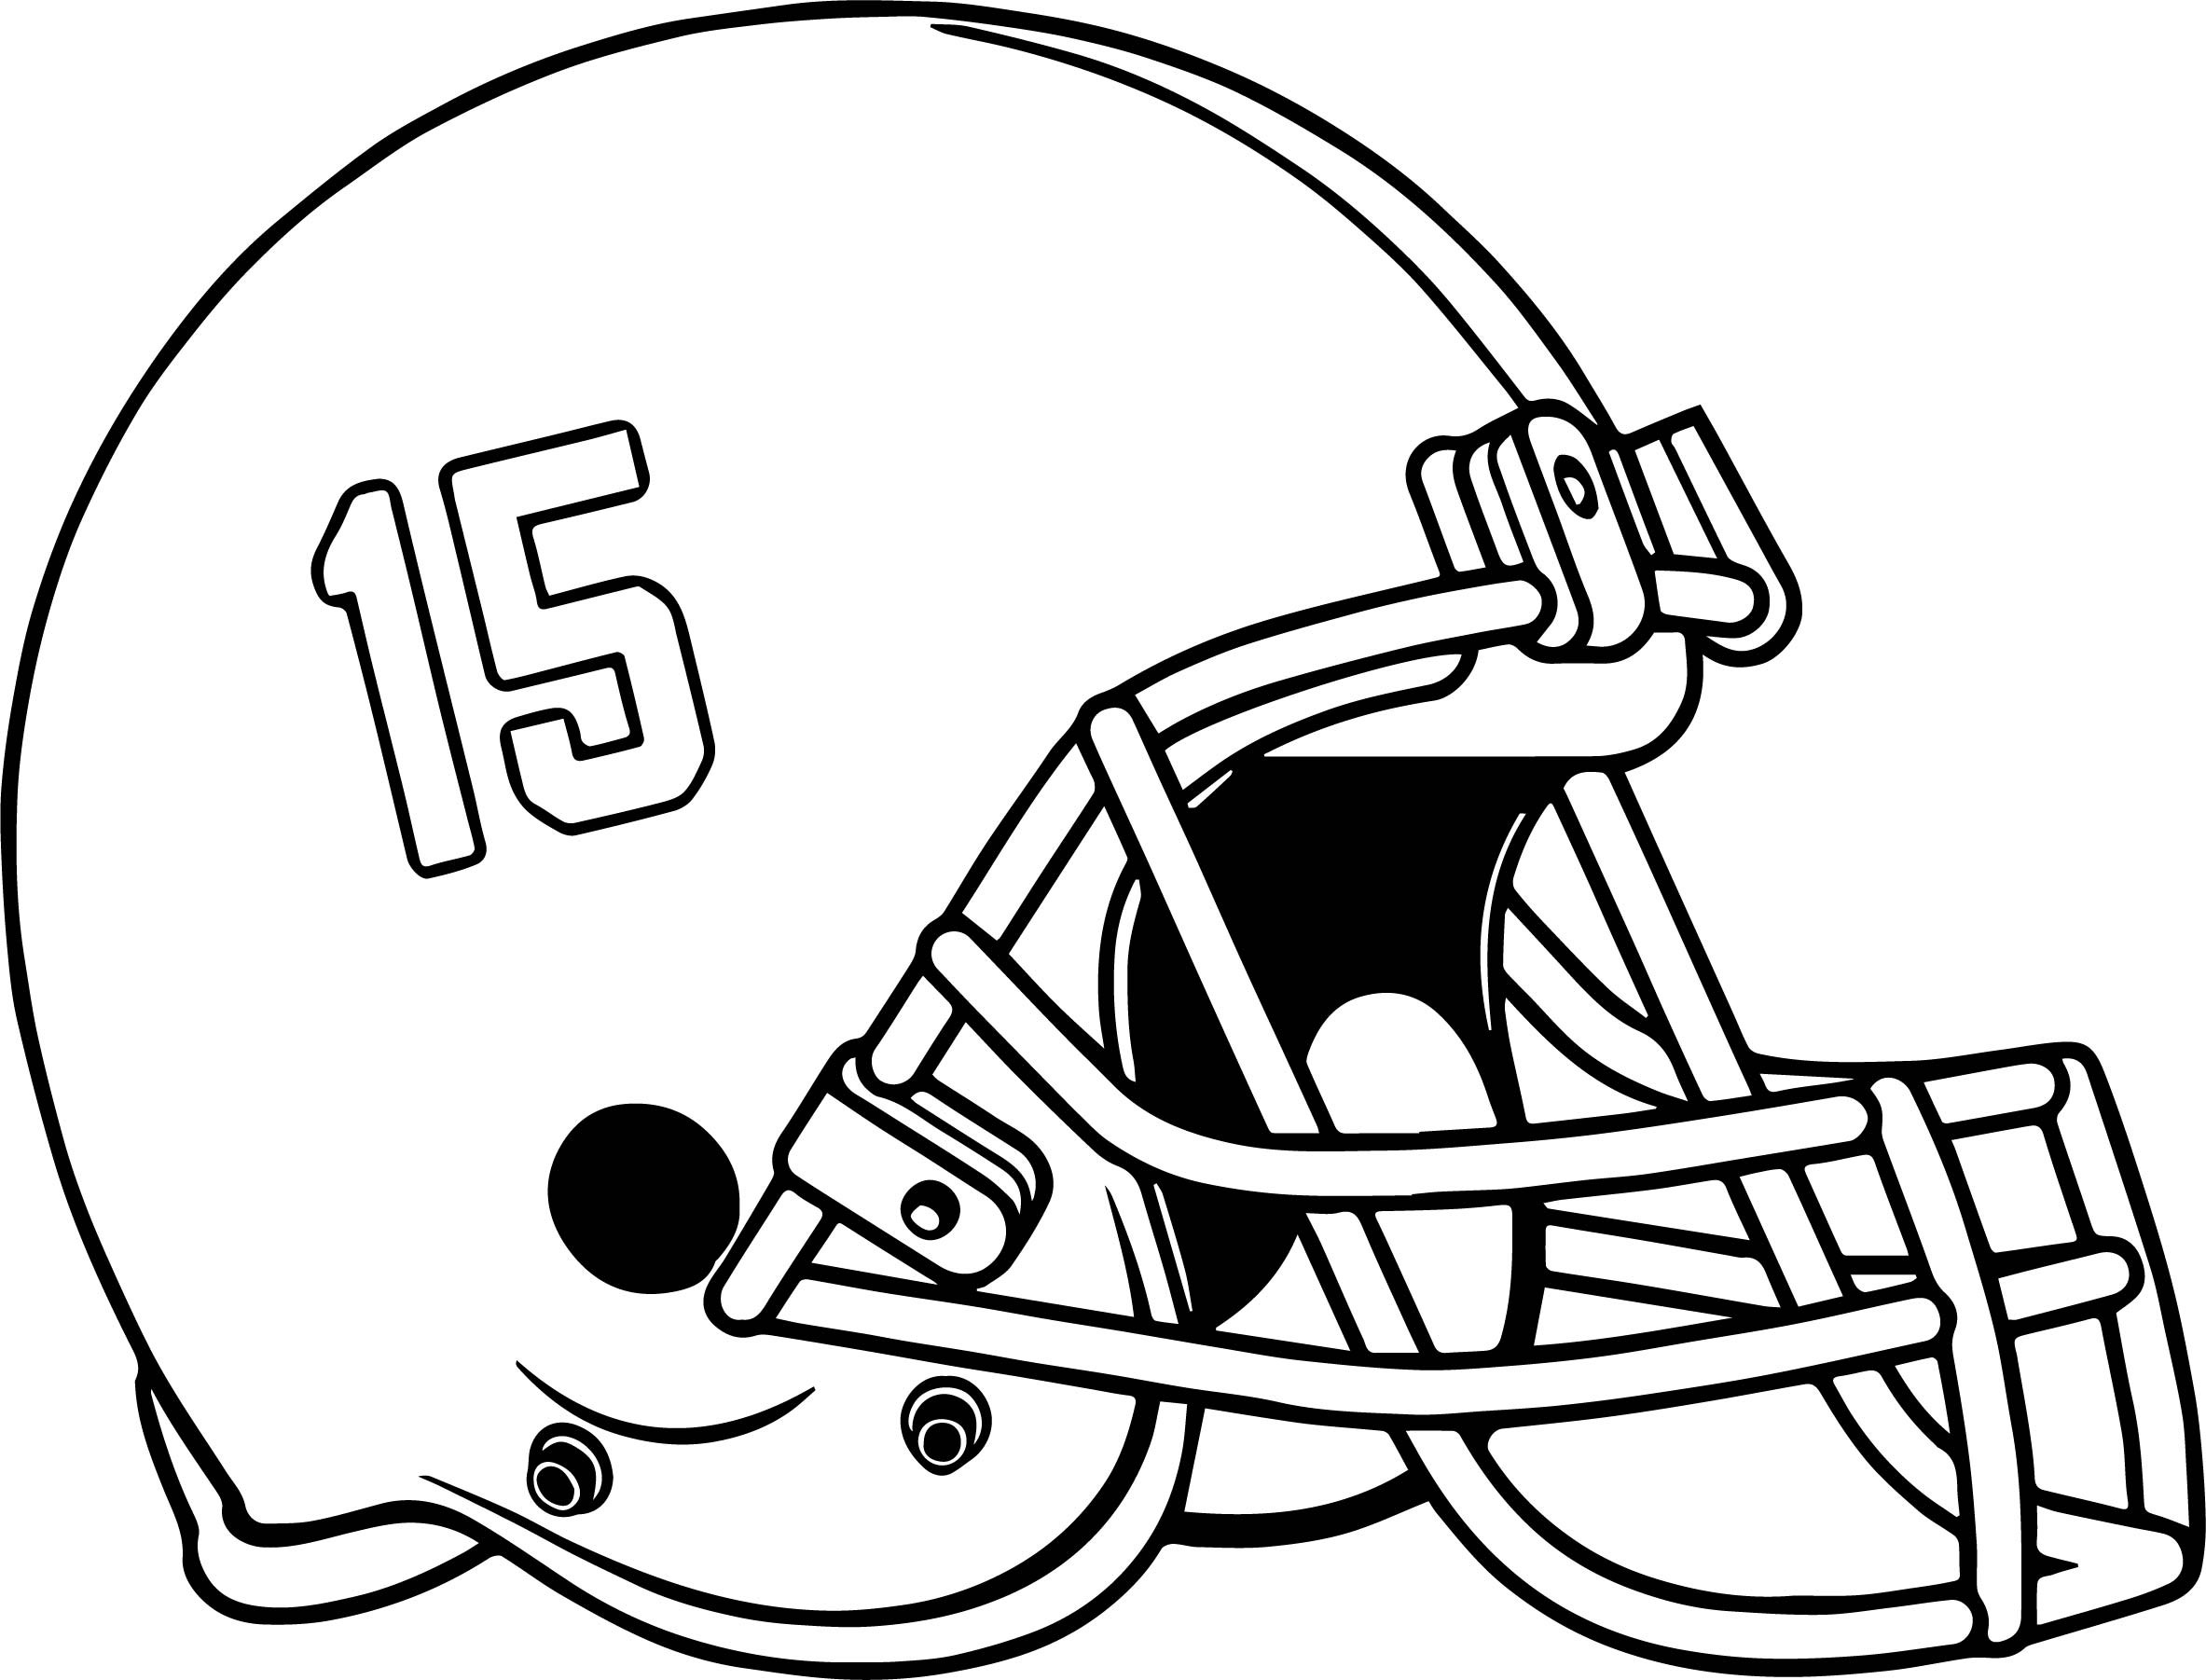 Alabama Football Coloring Pages
 Bama Alabama Helmet Fifteen Number Coloring Page